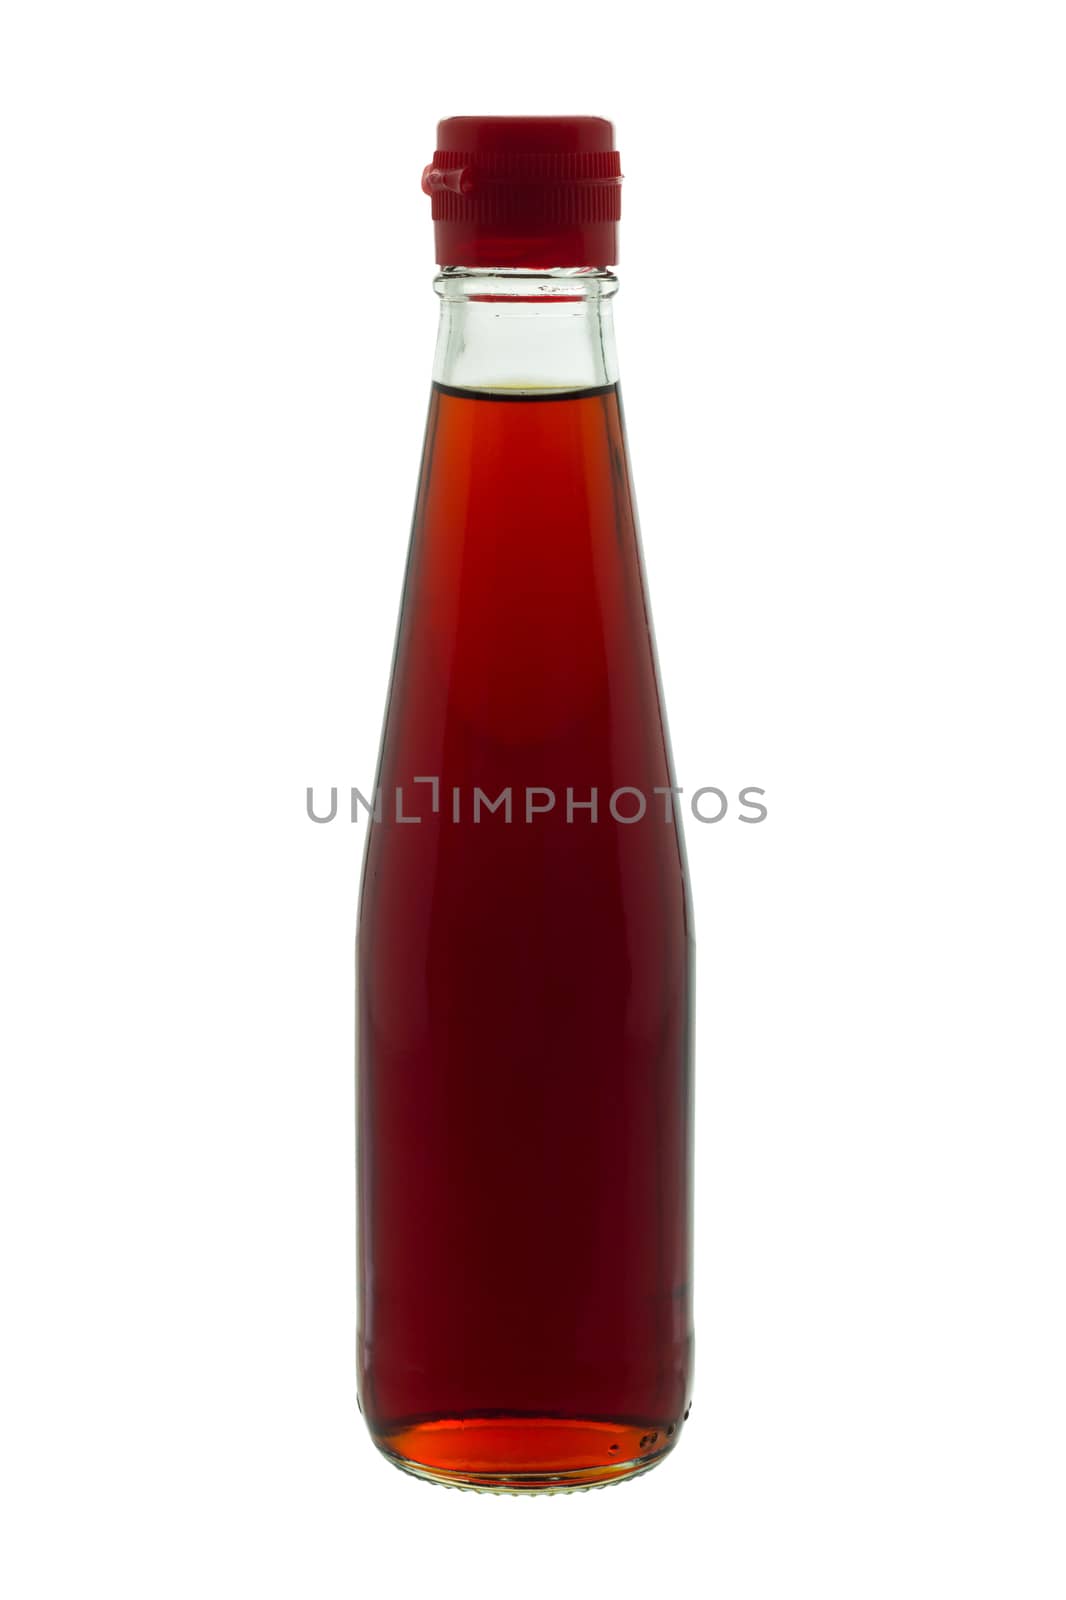 Fish sauce in glass bottle with red lid, isolated on white background